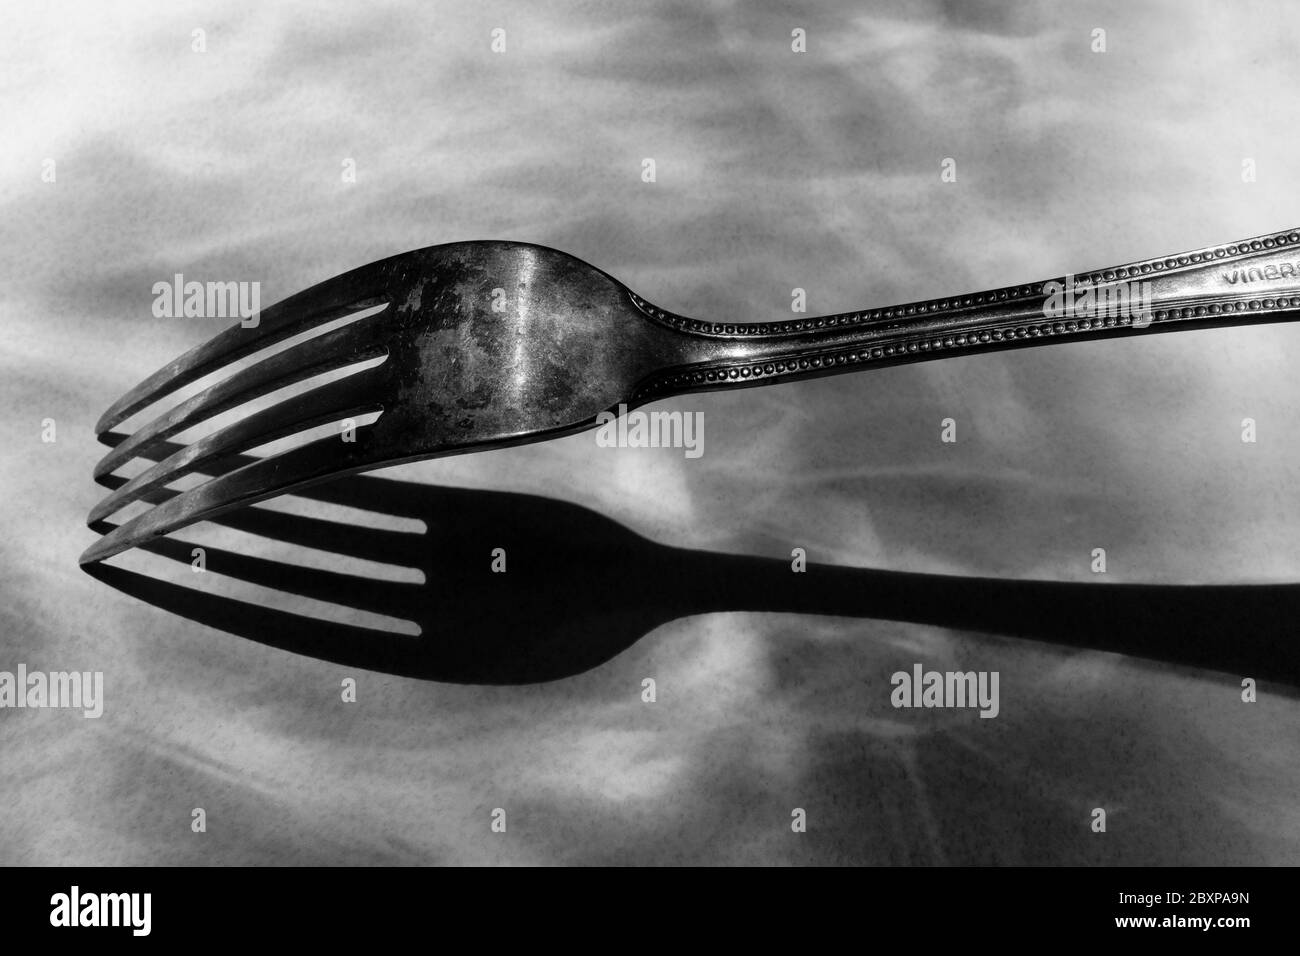 Black and white photography: A 20th century Modernist Photography inspired image of a dining fork and shadow. Stock Photo